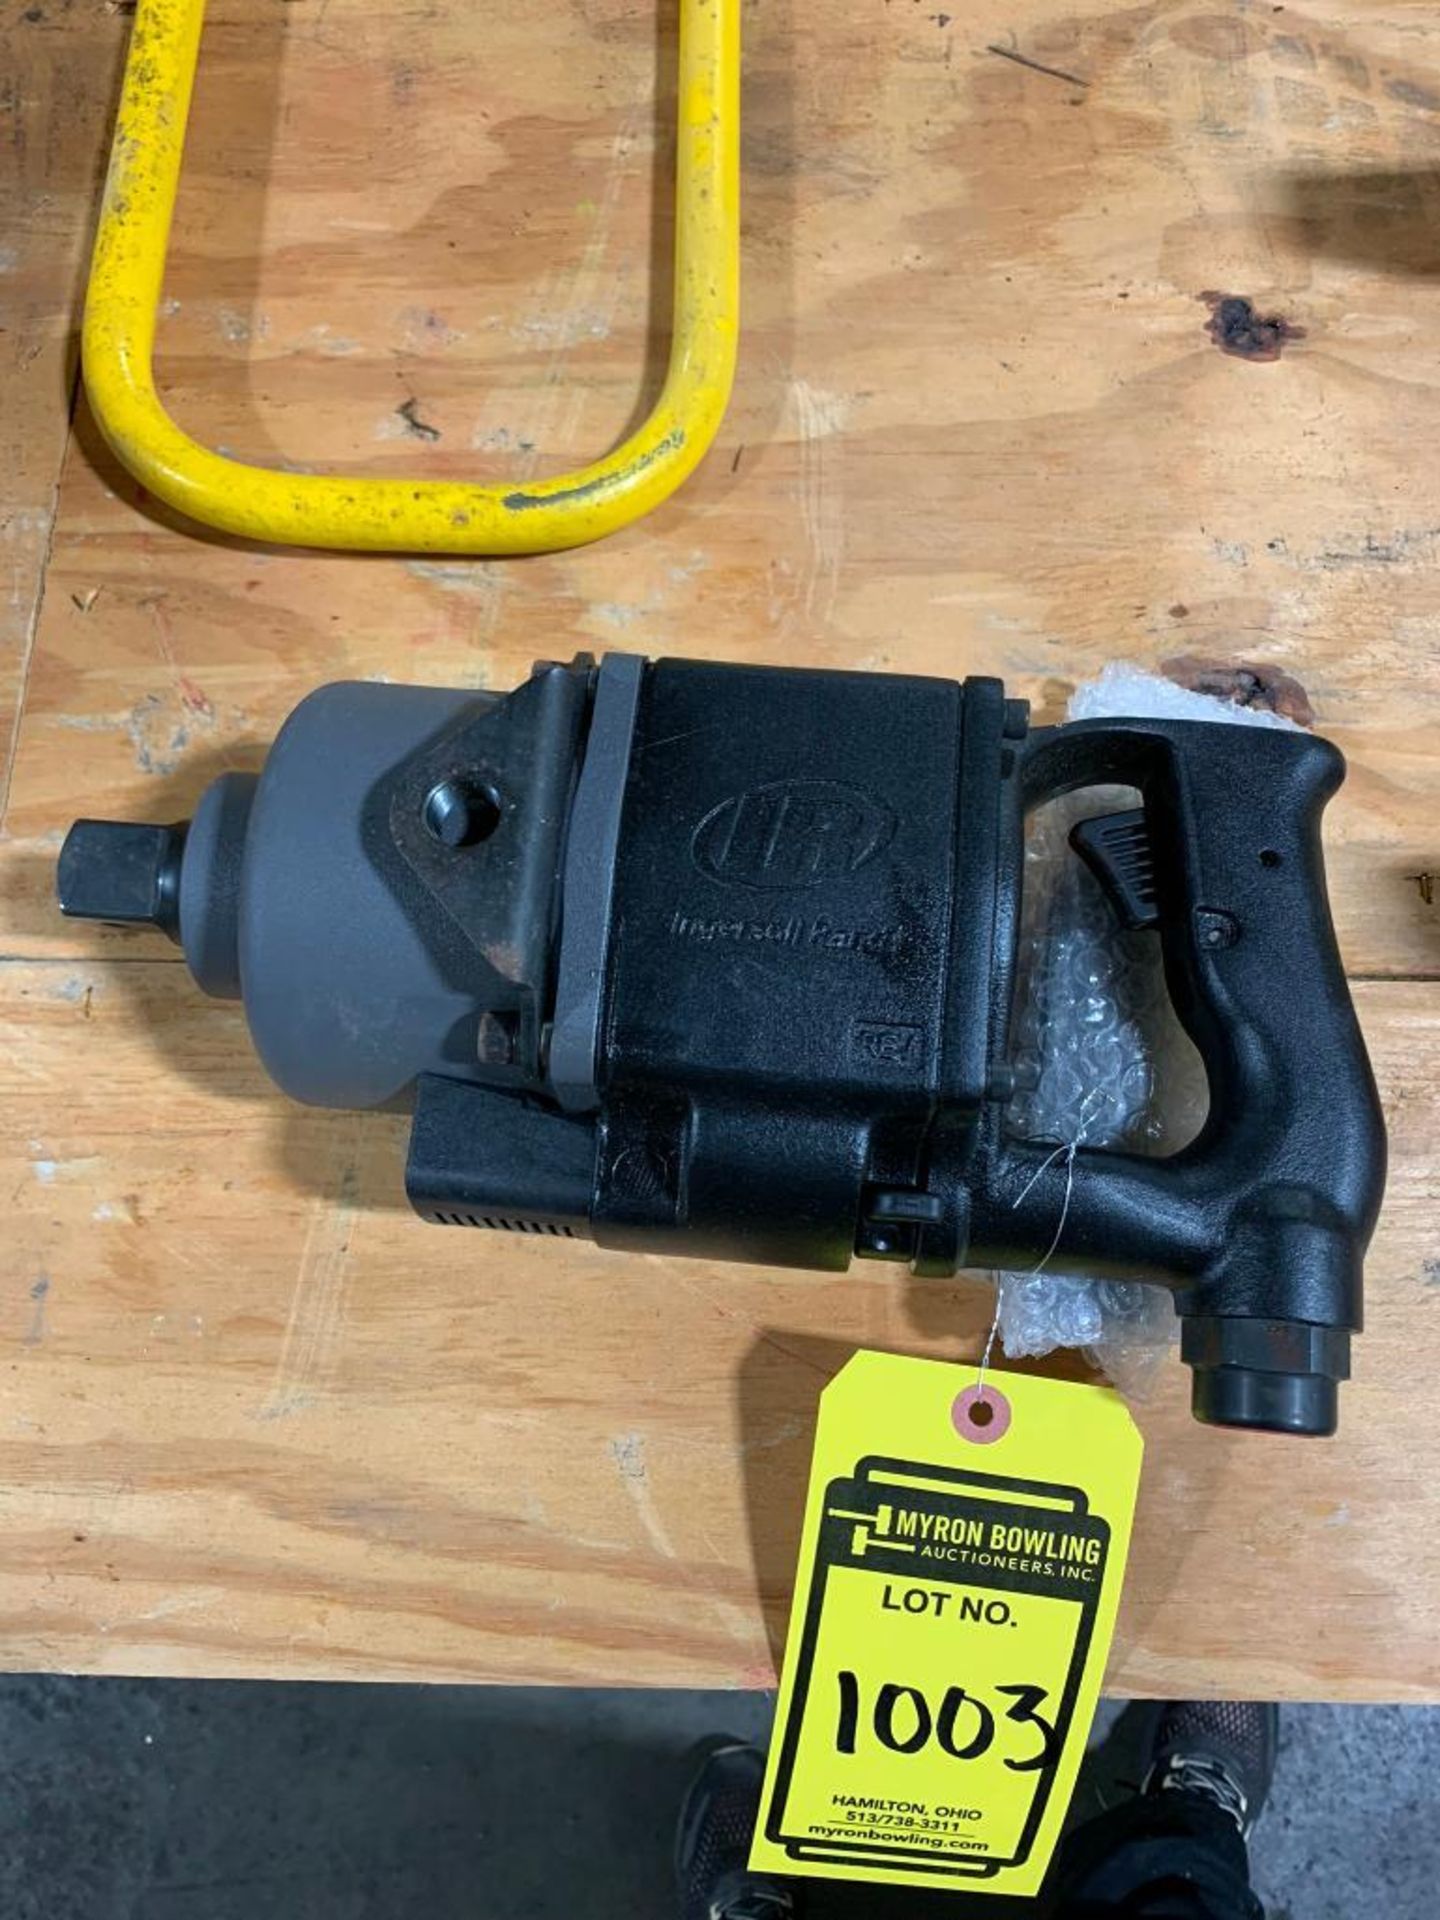 Ingersoll-Rand 1" Pneumatic Impact Wrench